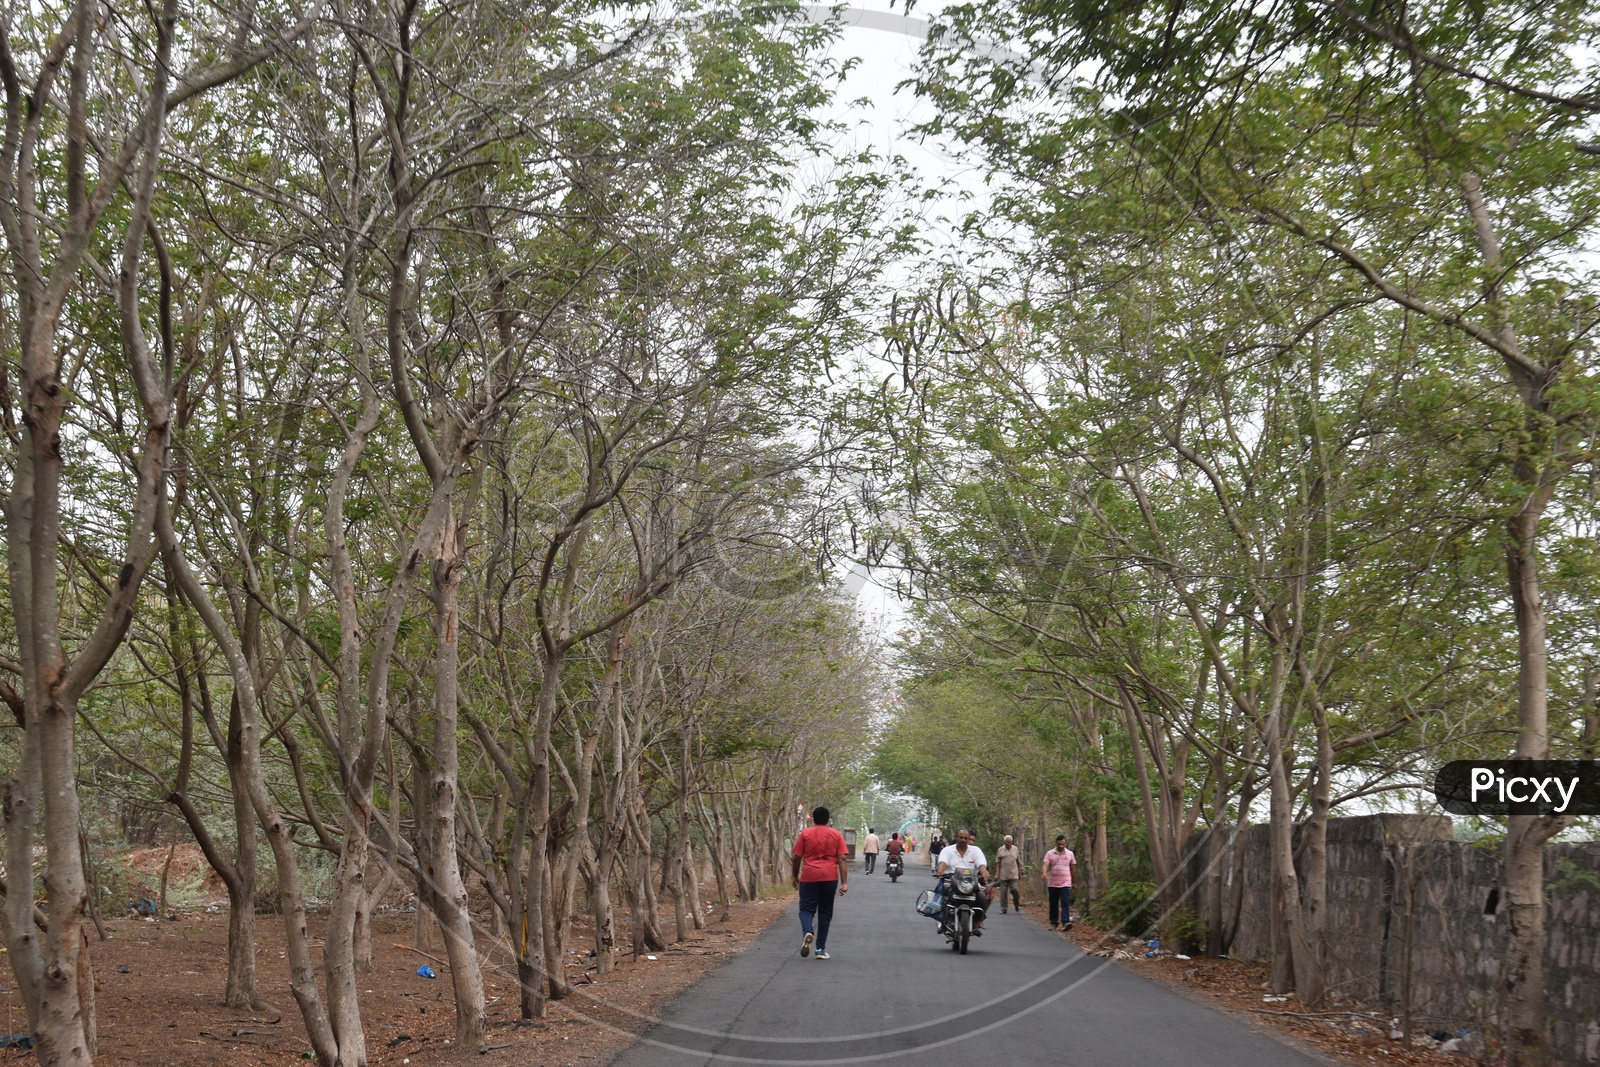 People on morning walks in rail eco park